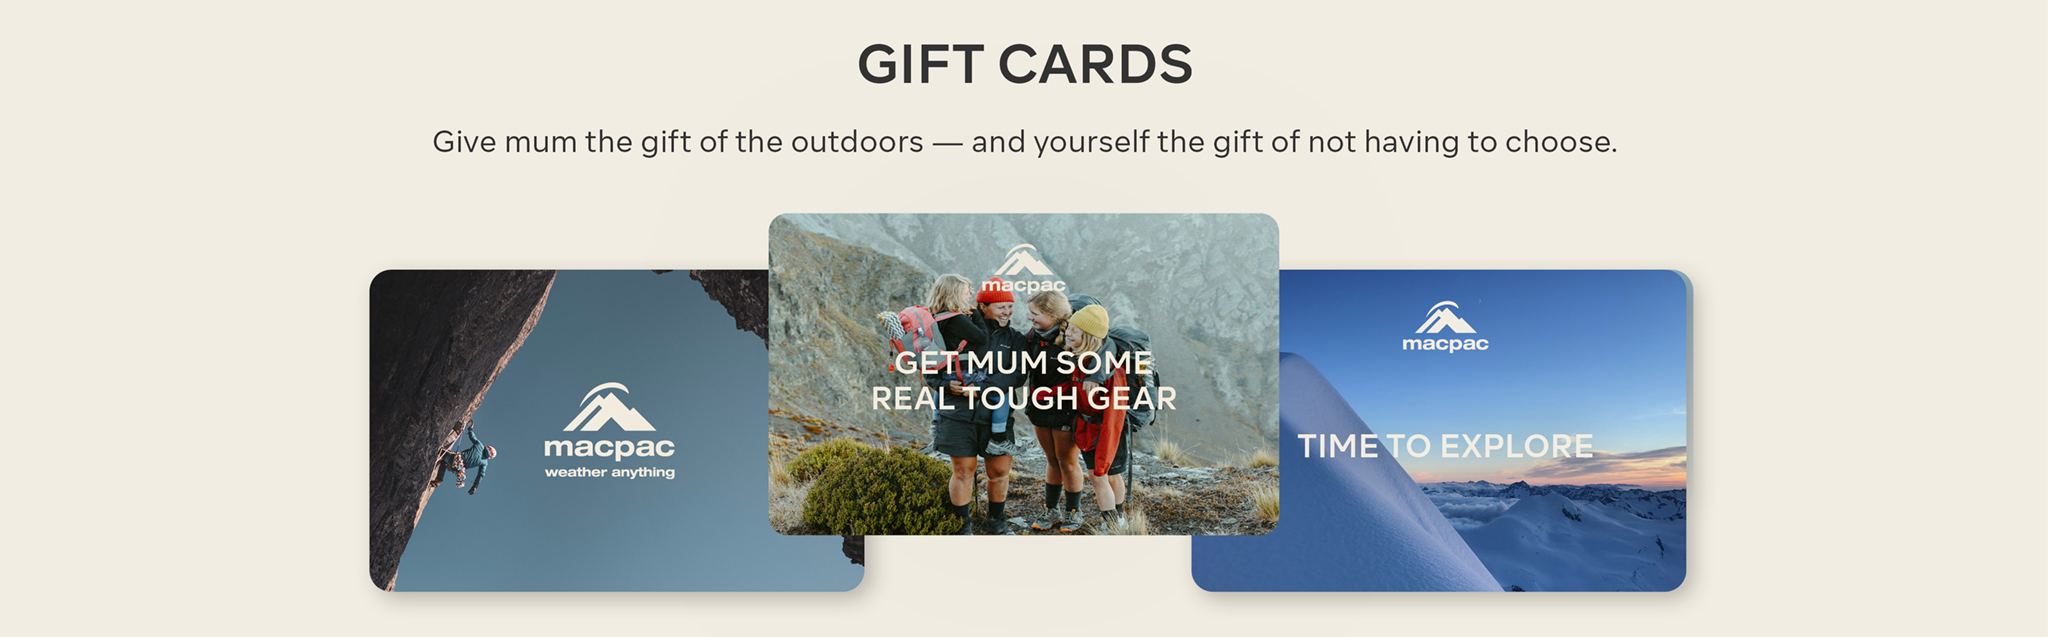 GIFT CARDS - Give mum the gift of the outdoors